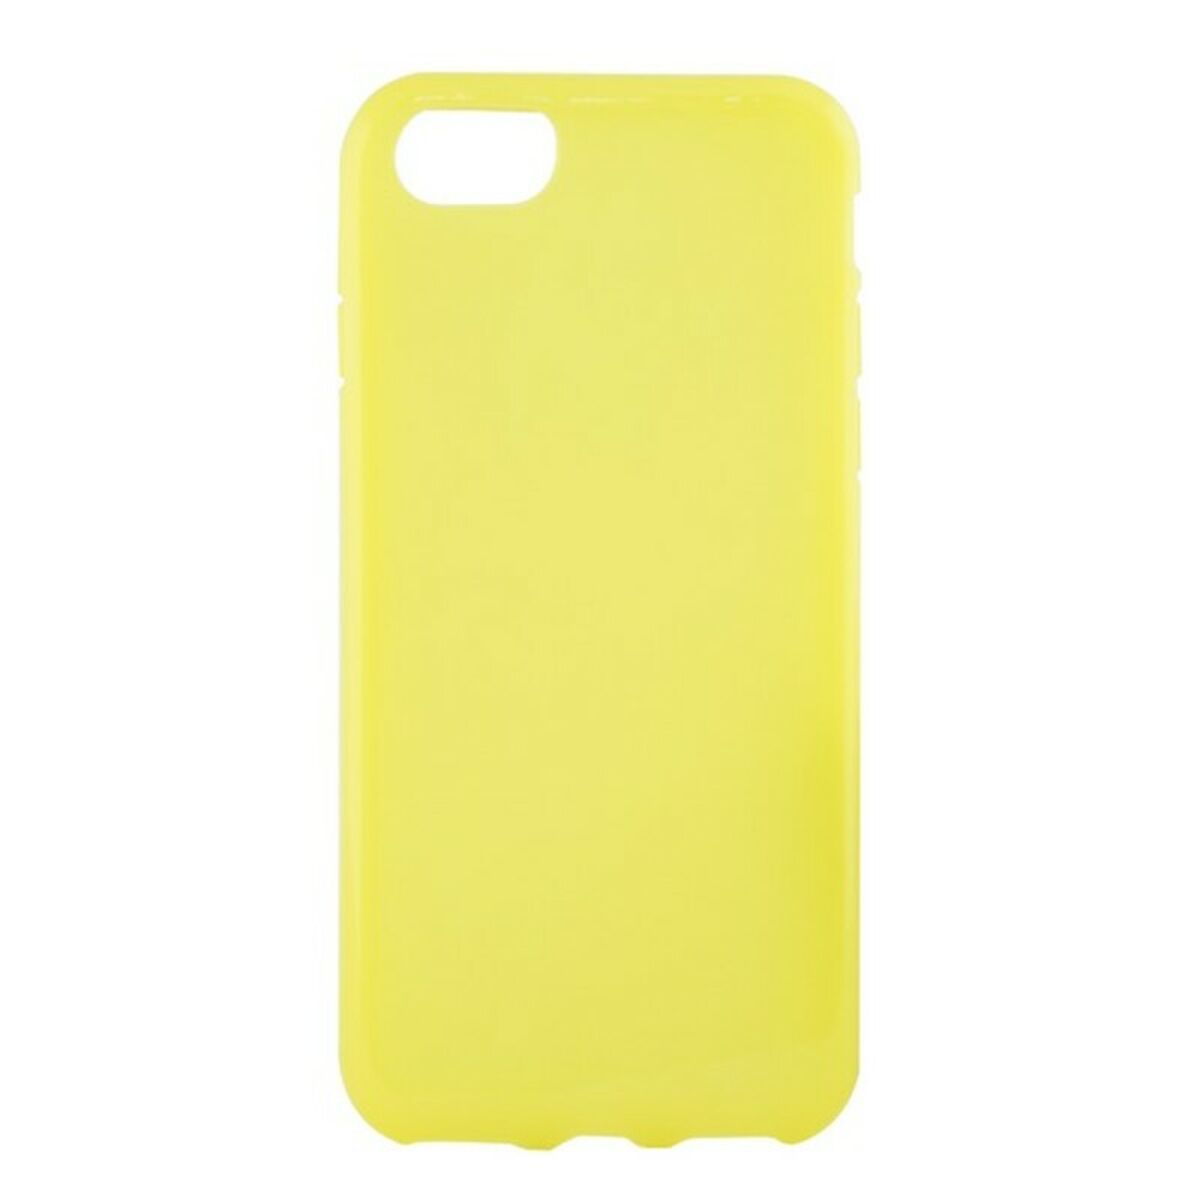 Mobile cover KSIX IPHONE 8, 7, 6, 6S SE 2020 Yellow